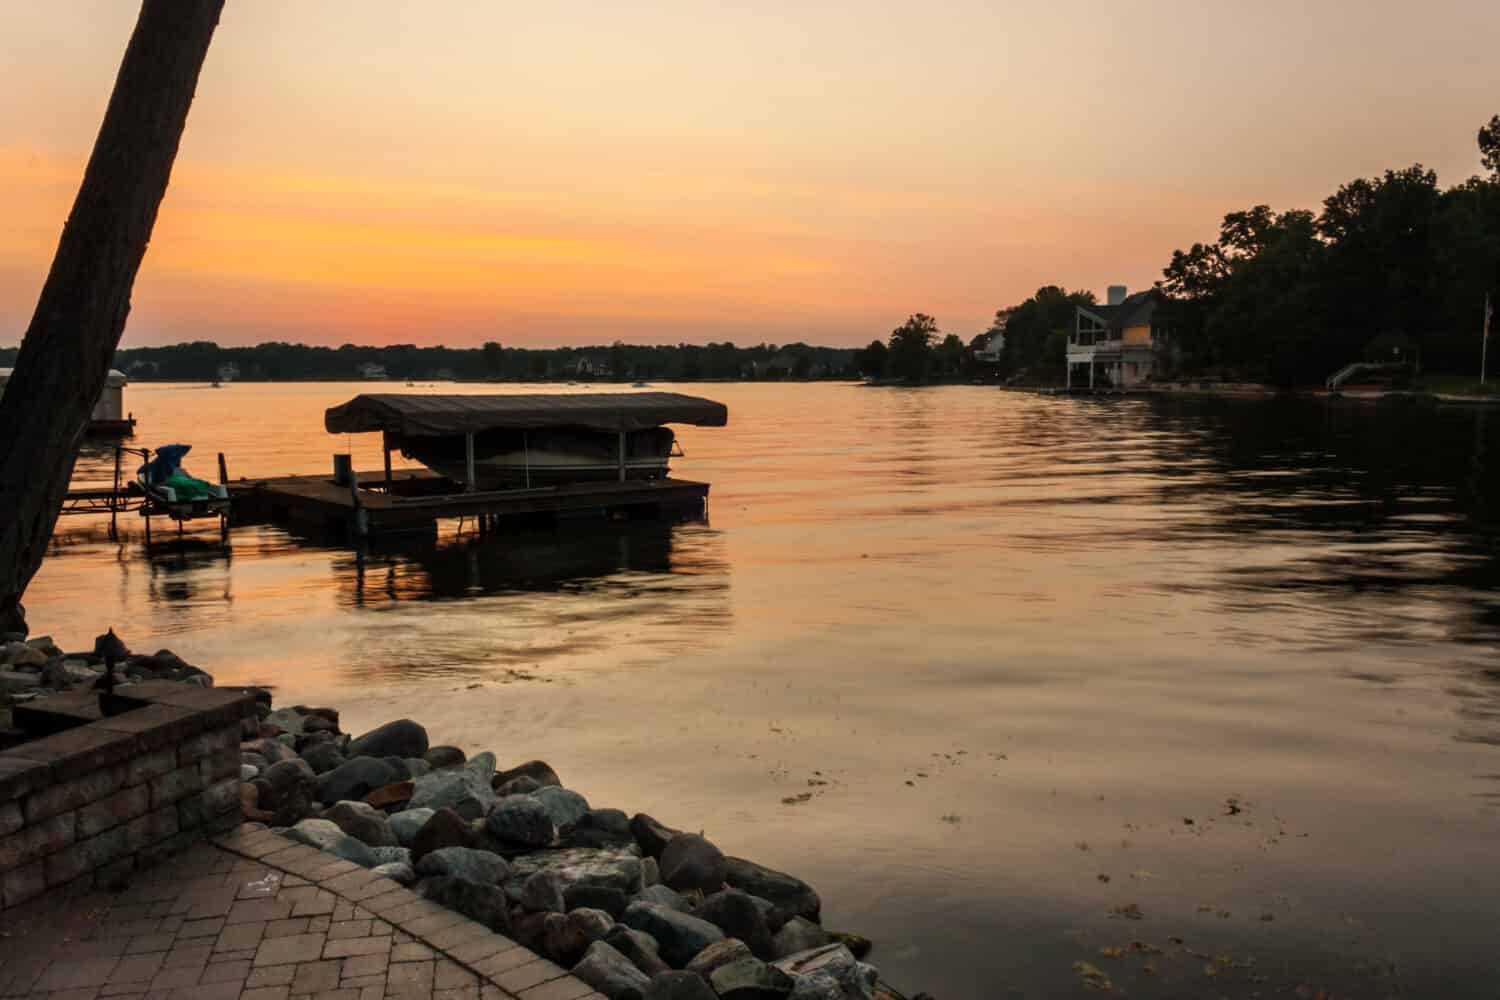 Sunset on Geist Reservoir in Lawrence IN